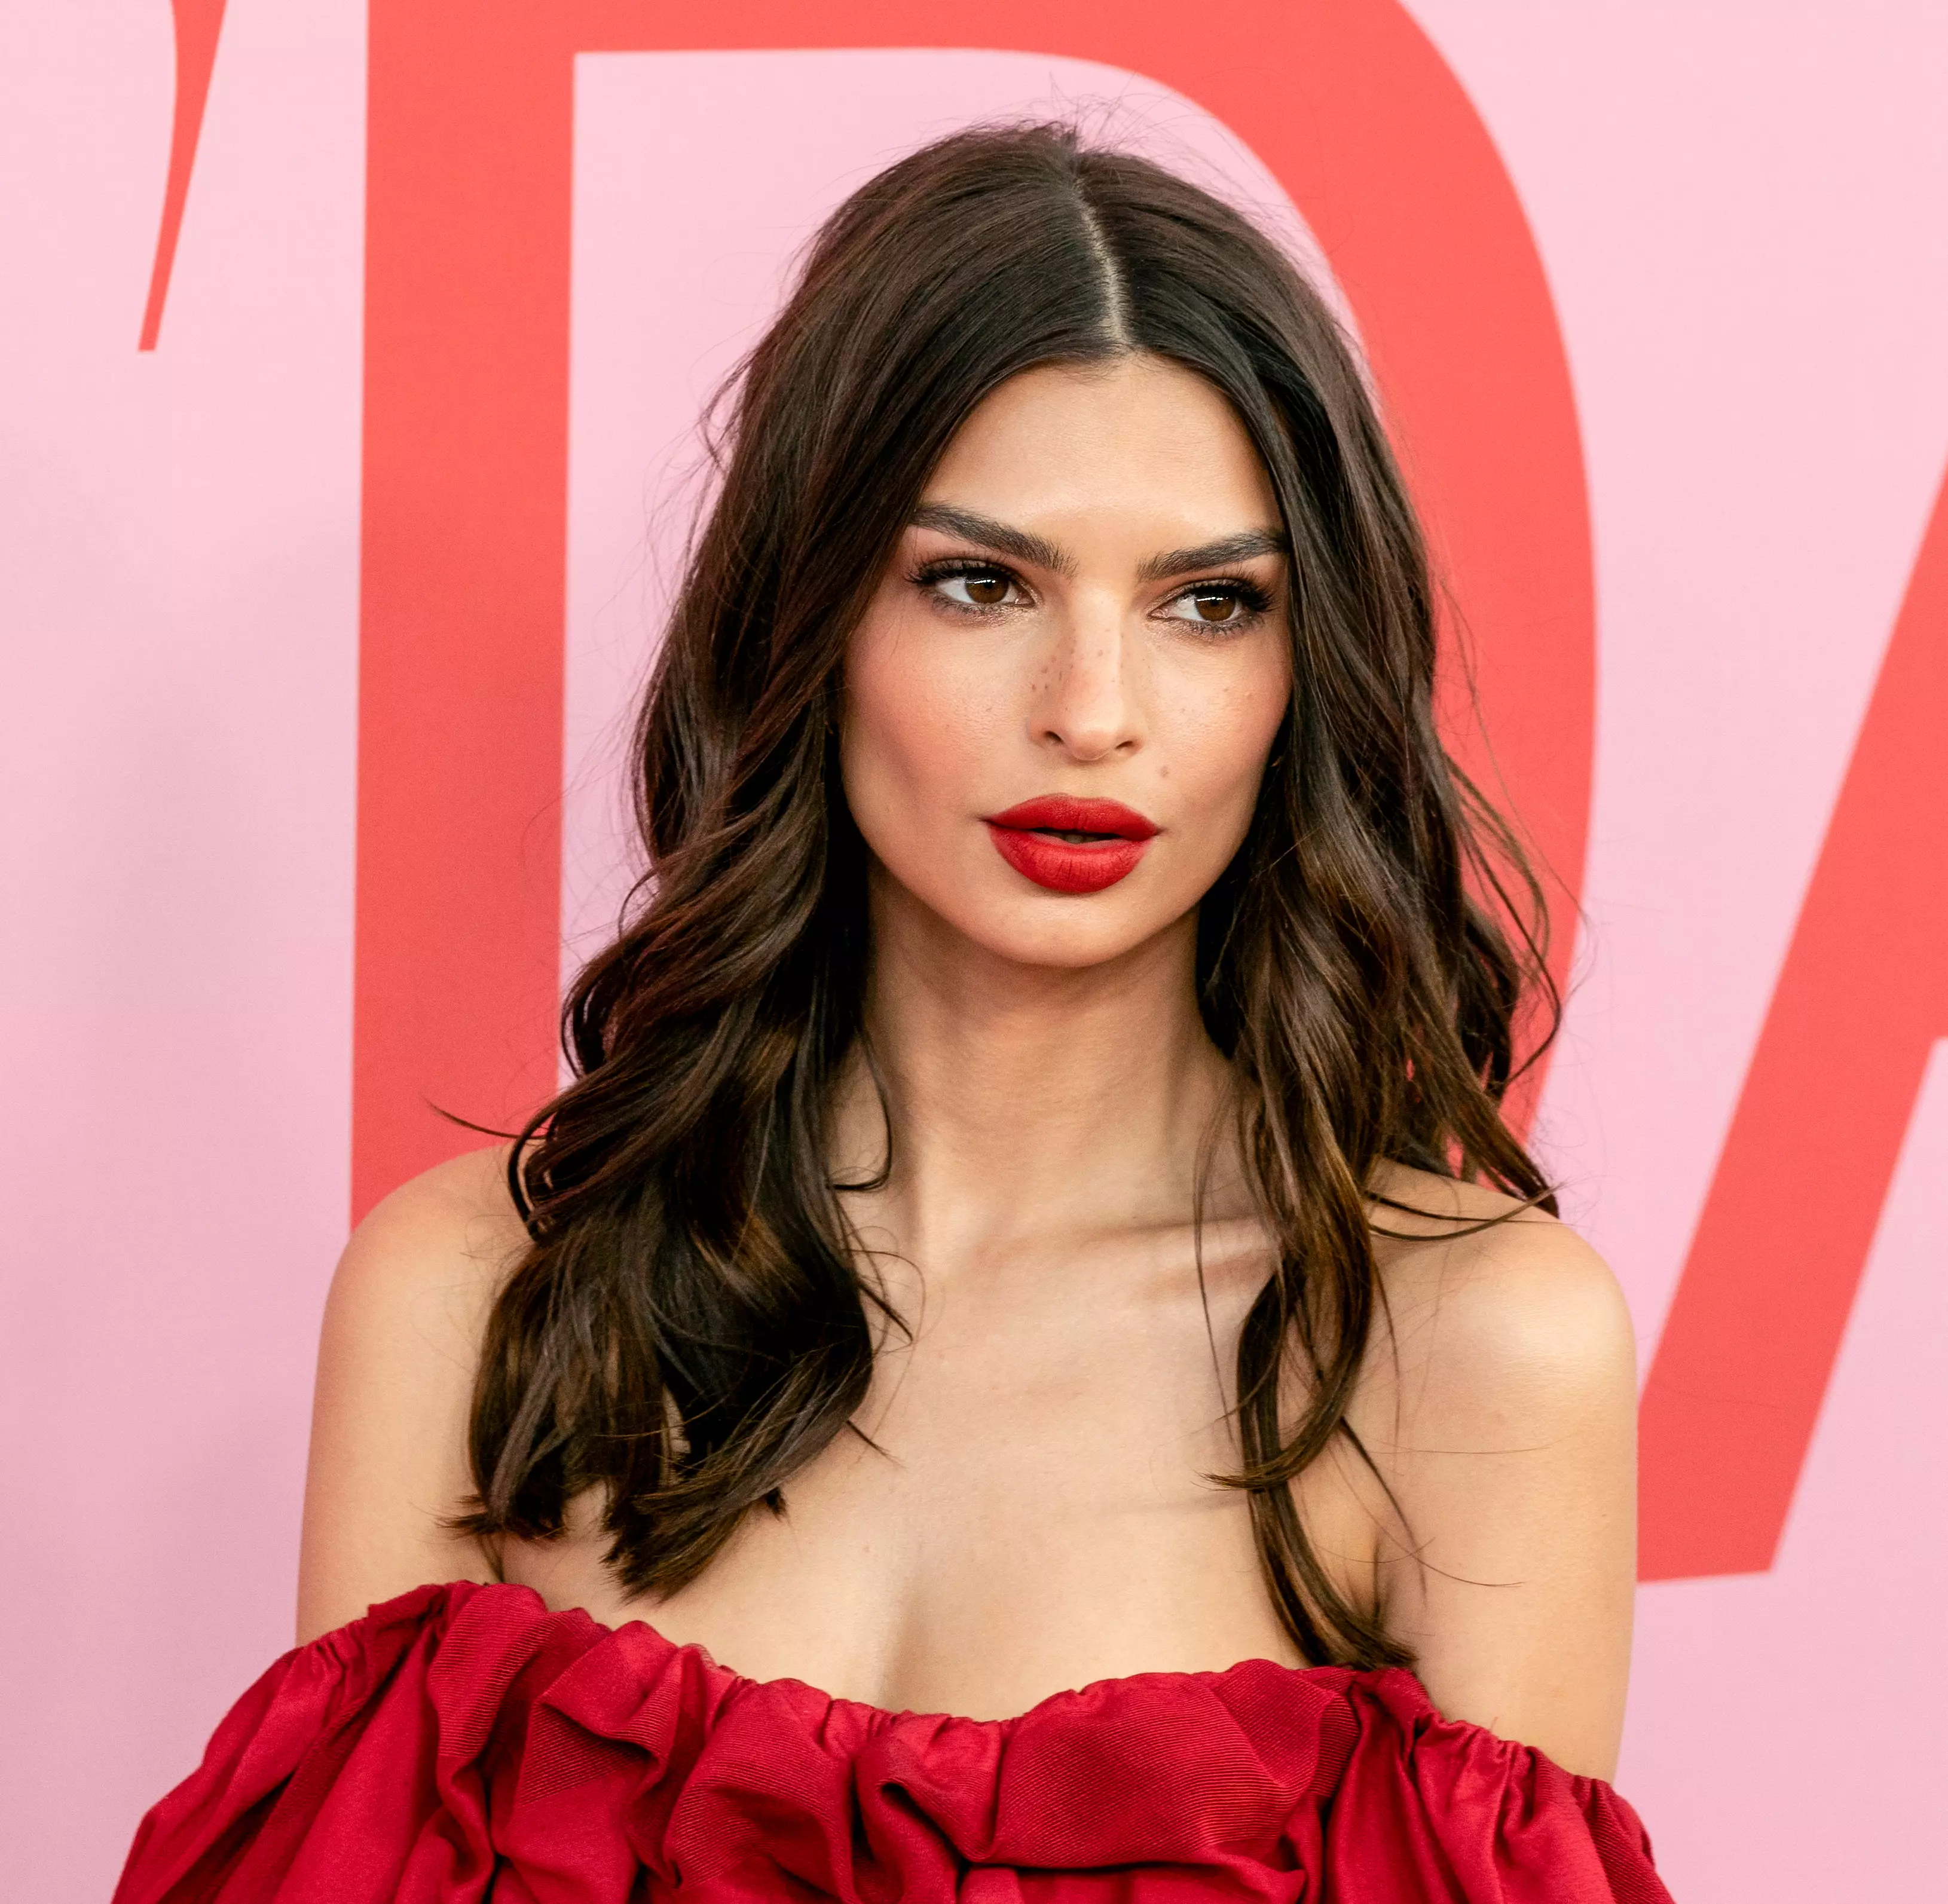 Emily Ratajkowski hit headlines with a powerful essay in The Cut this week (